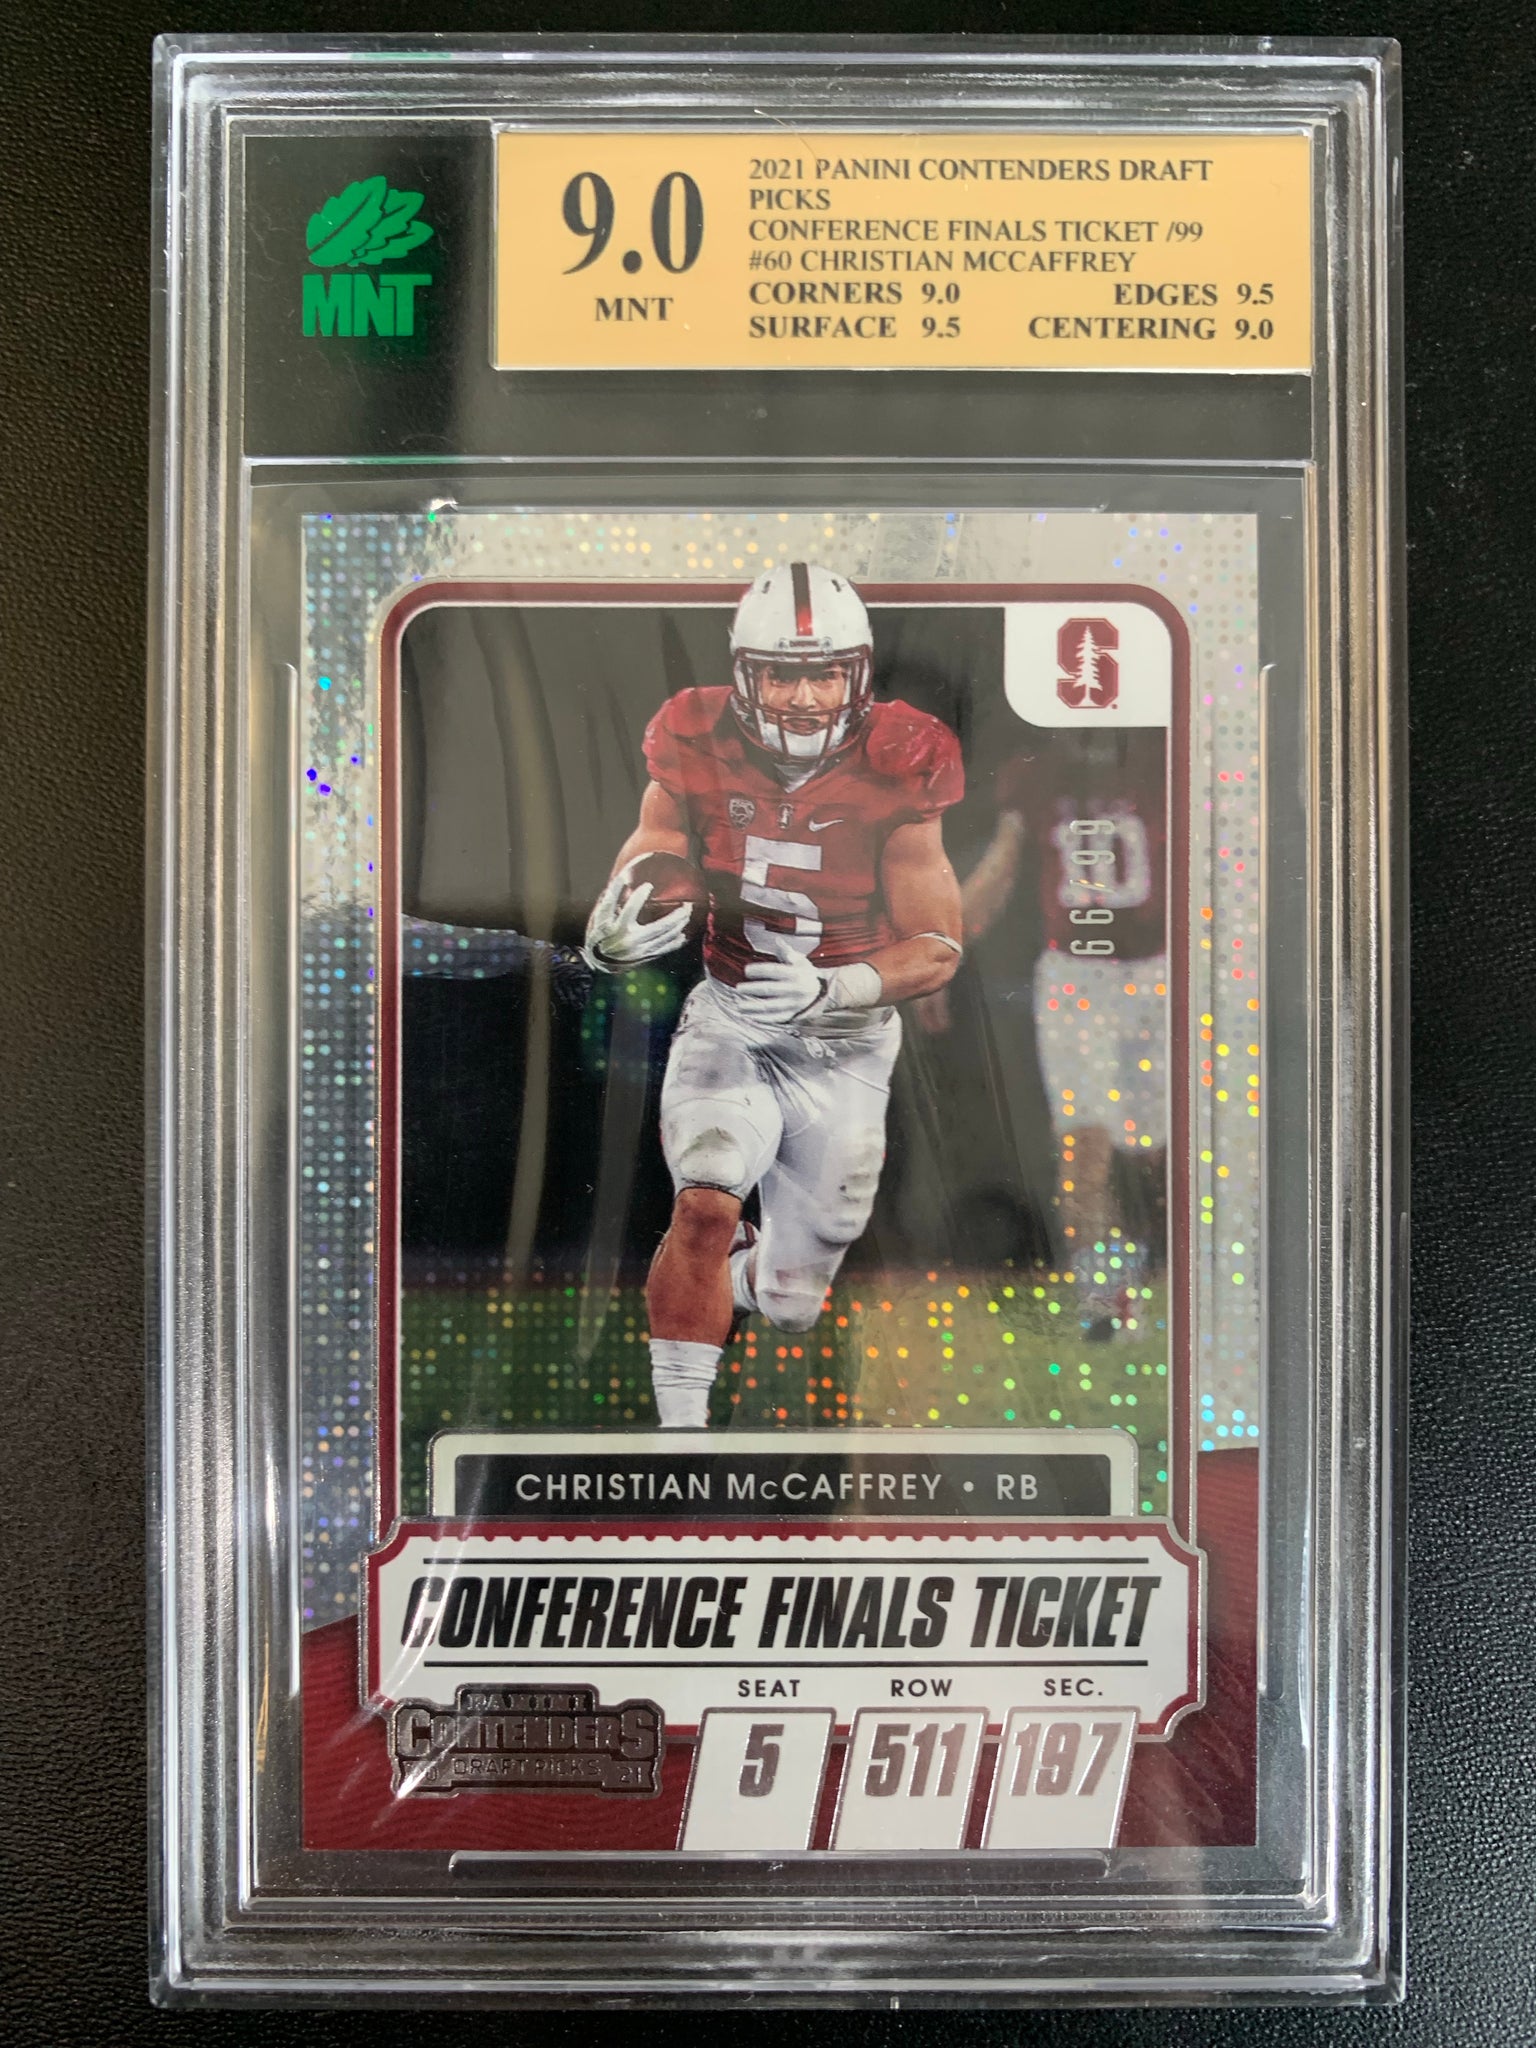 2021 PANINI CONTENDERS DRAFT PICKS FOOTBALL #60 CAROLINA PANTHERS - CHRISTIAN MCCAFFREY CONFERENCE FINALS TICKET PRIZM NUMBERED 66/99 GRADED MNT 9.0 MINT